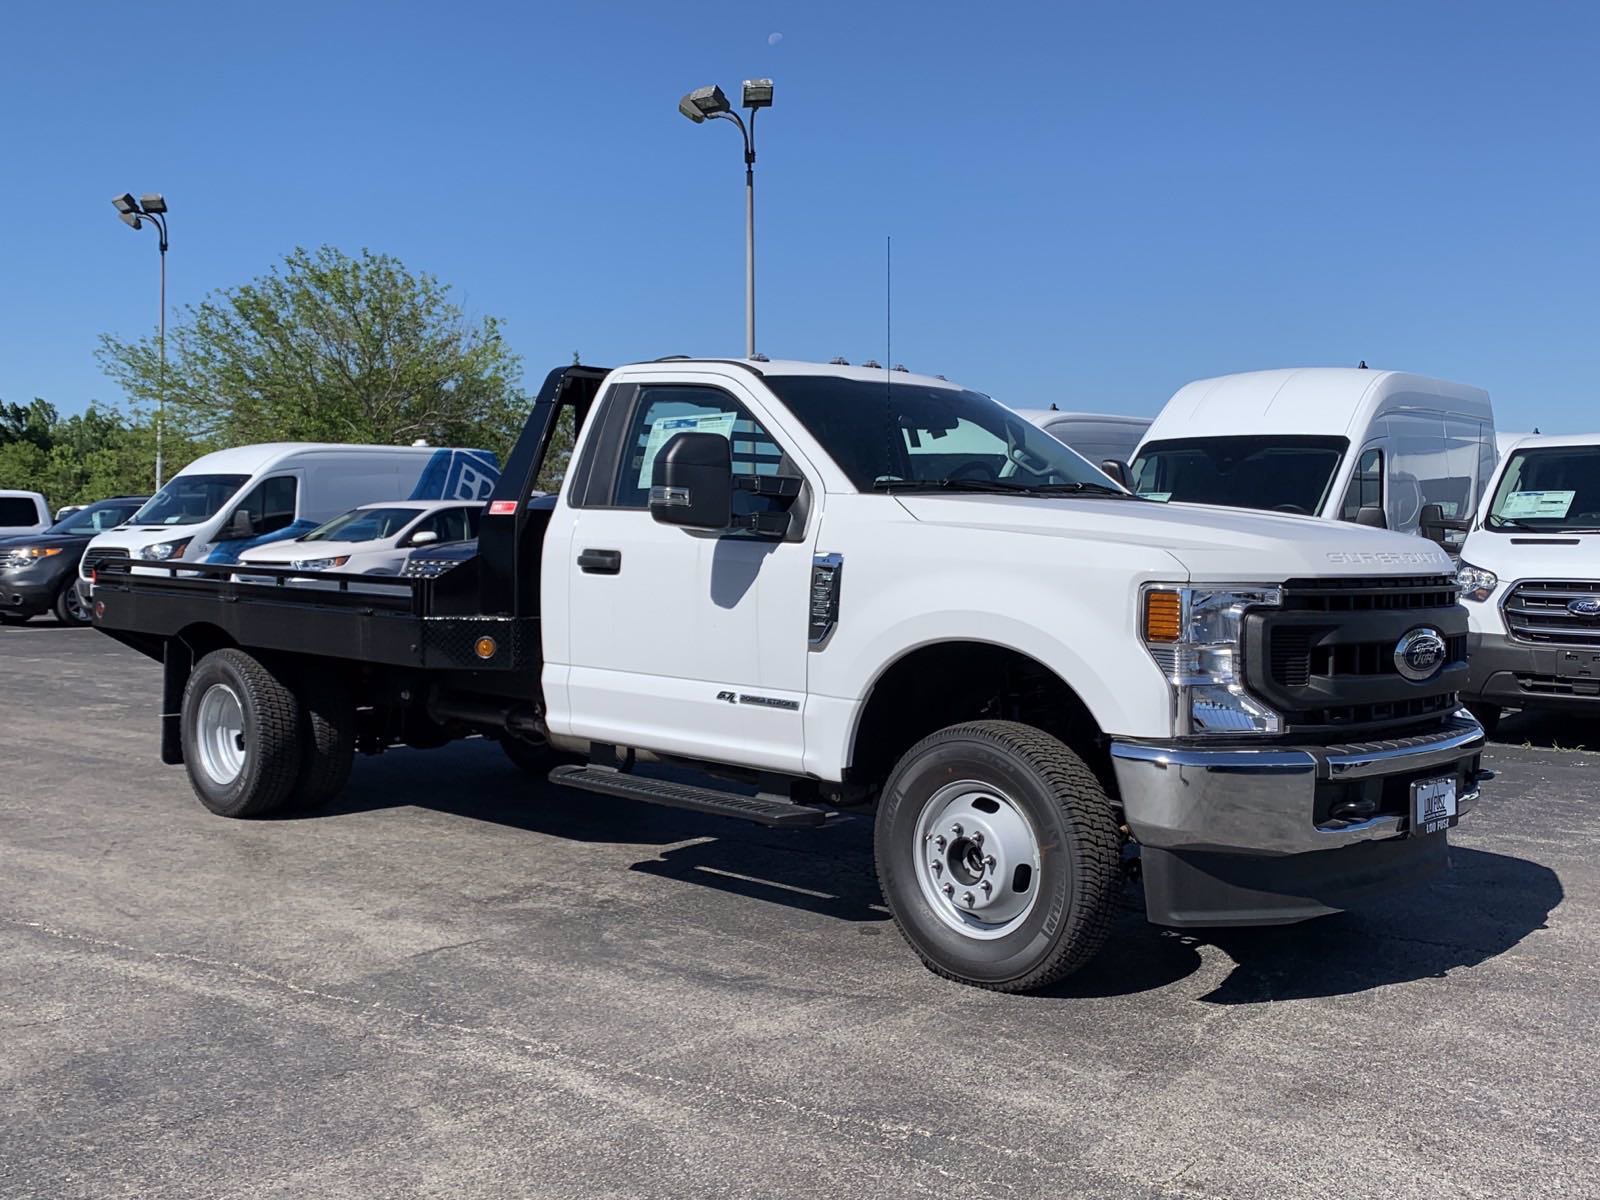 New 2020 Ford Super Duty F350 DRW XL 4WD Regular Cab ChassisCab